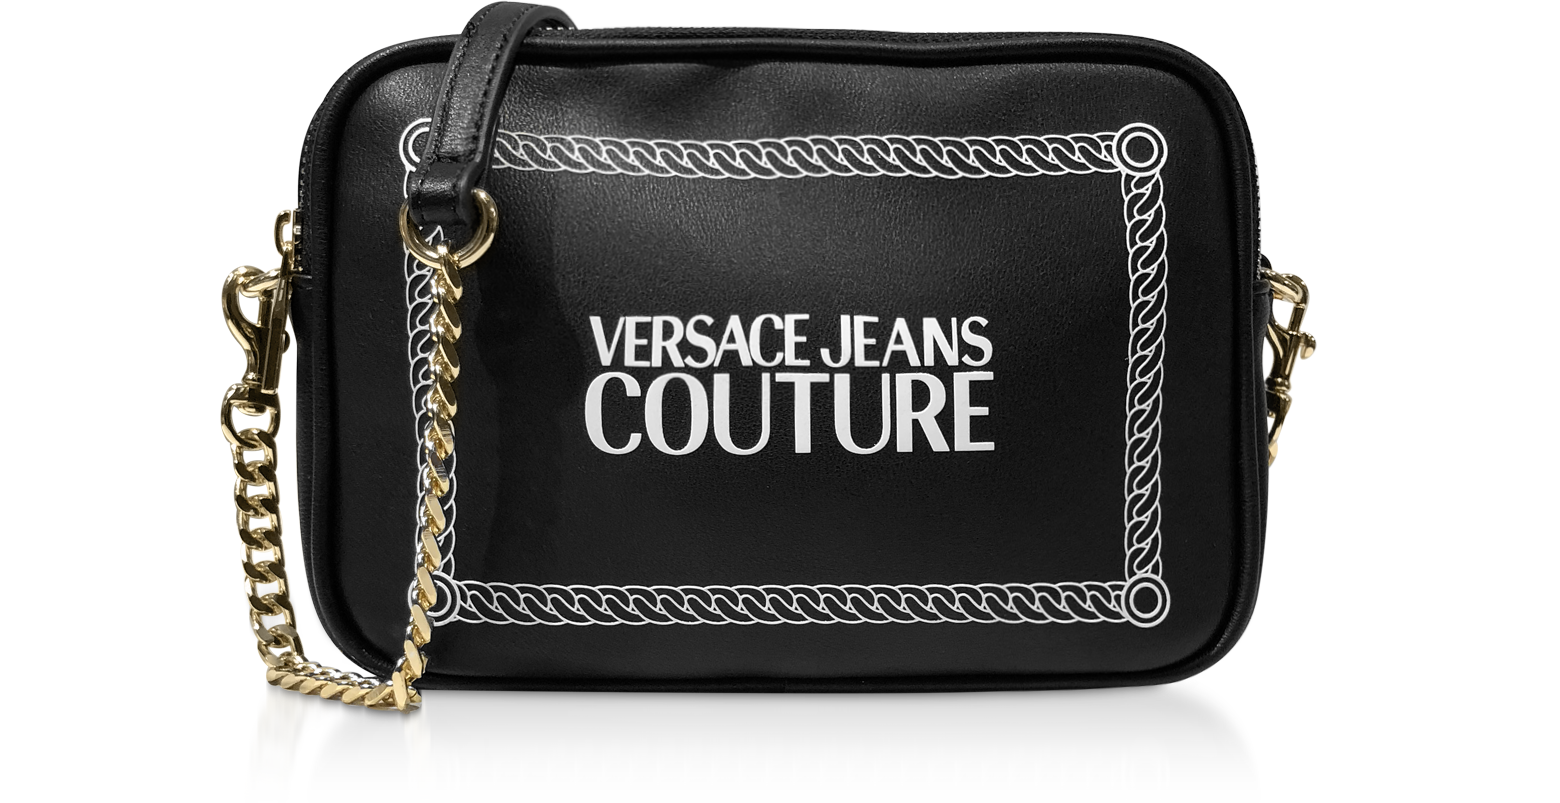 Versace Jeans Couture Black and White 